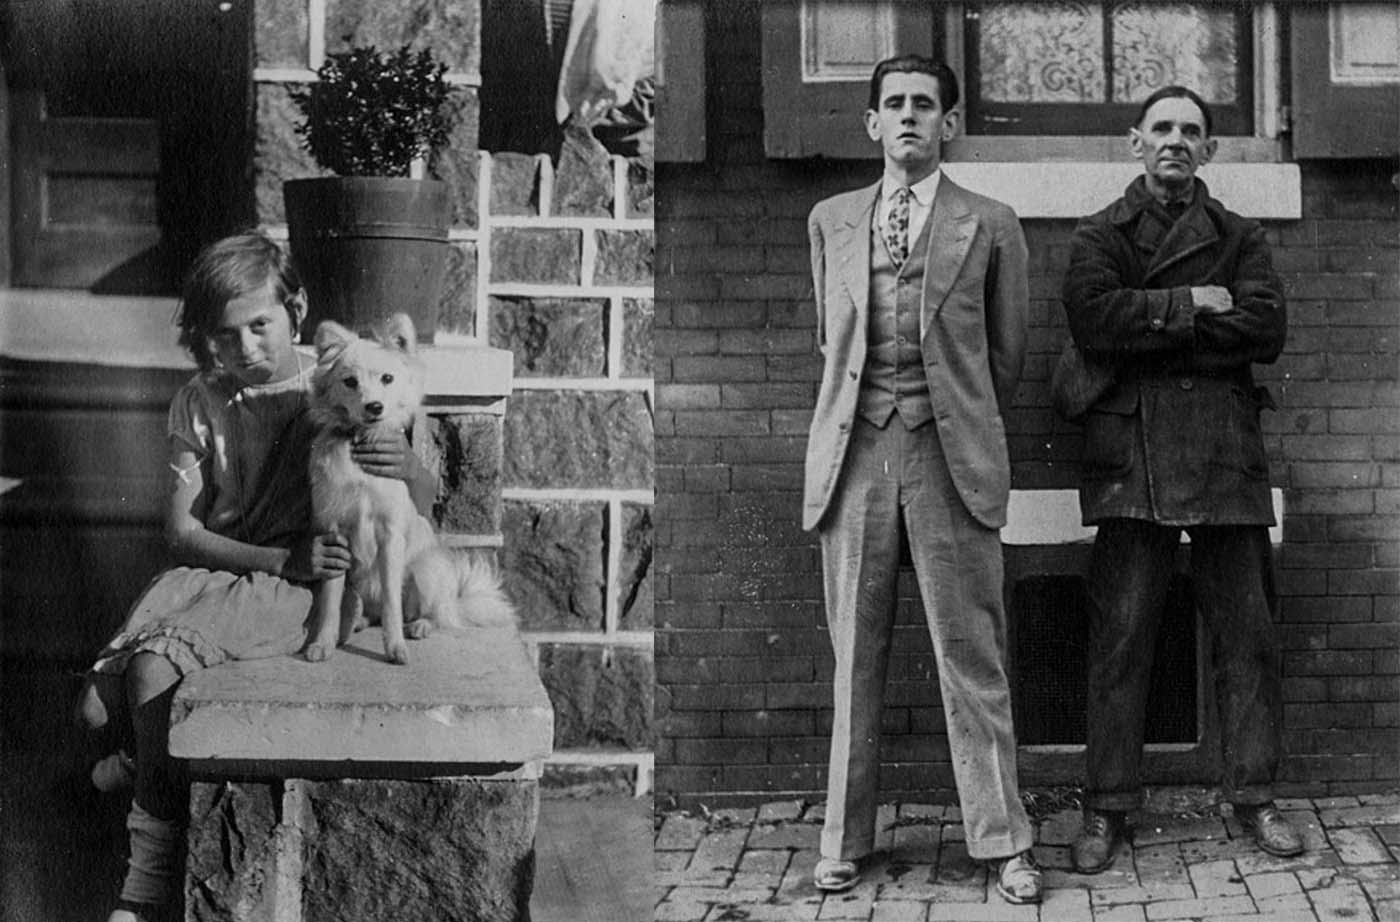 Gritty portraits show Philadelphia residents on their stoops, 1910-1940